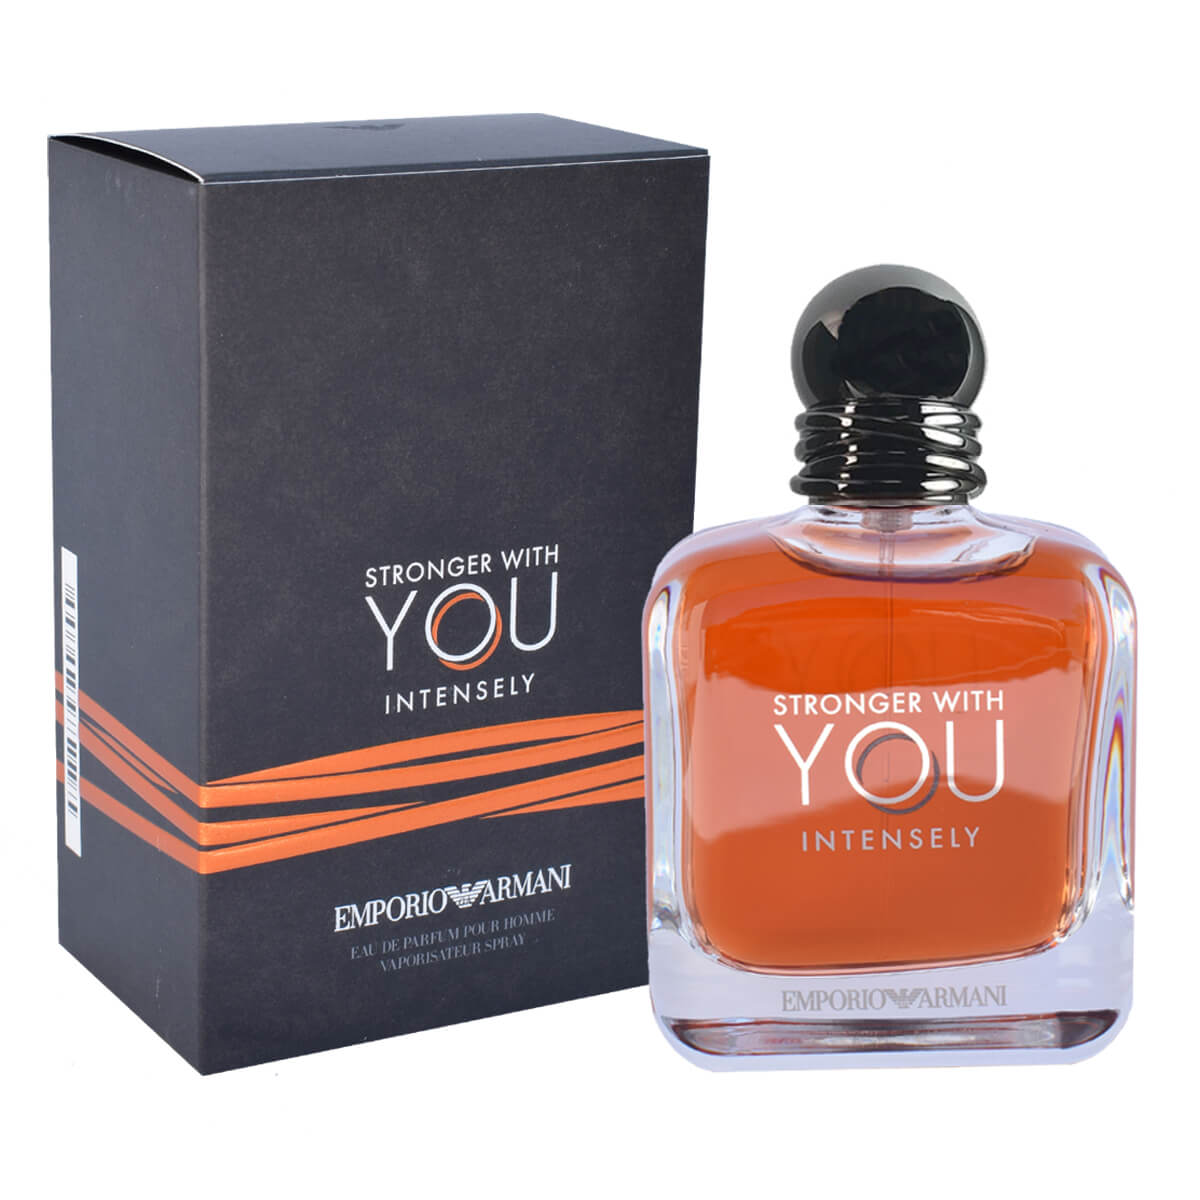 armani stronger with you intensely review